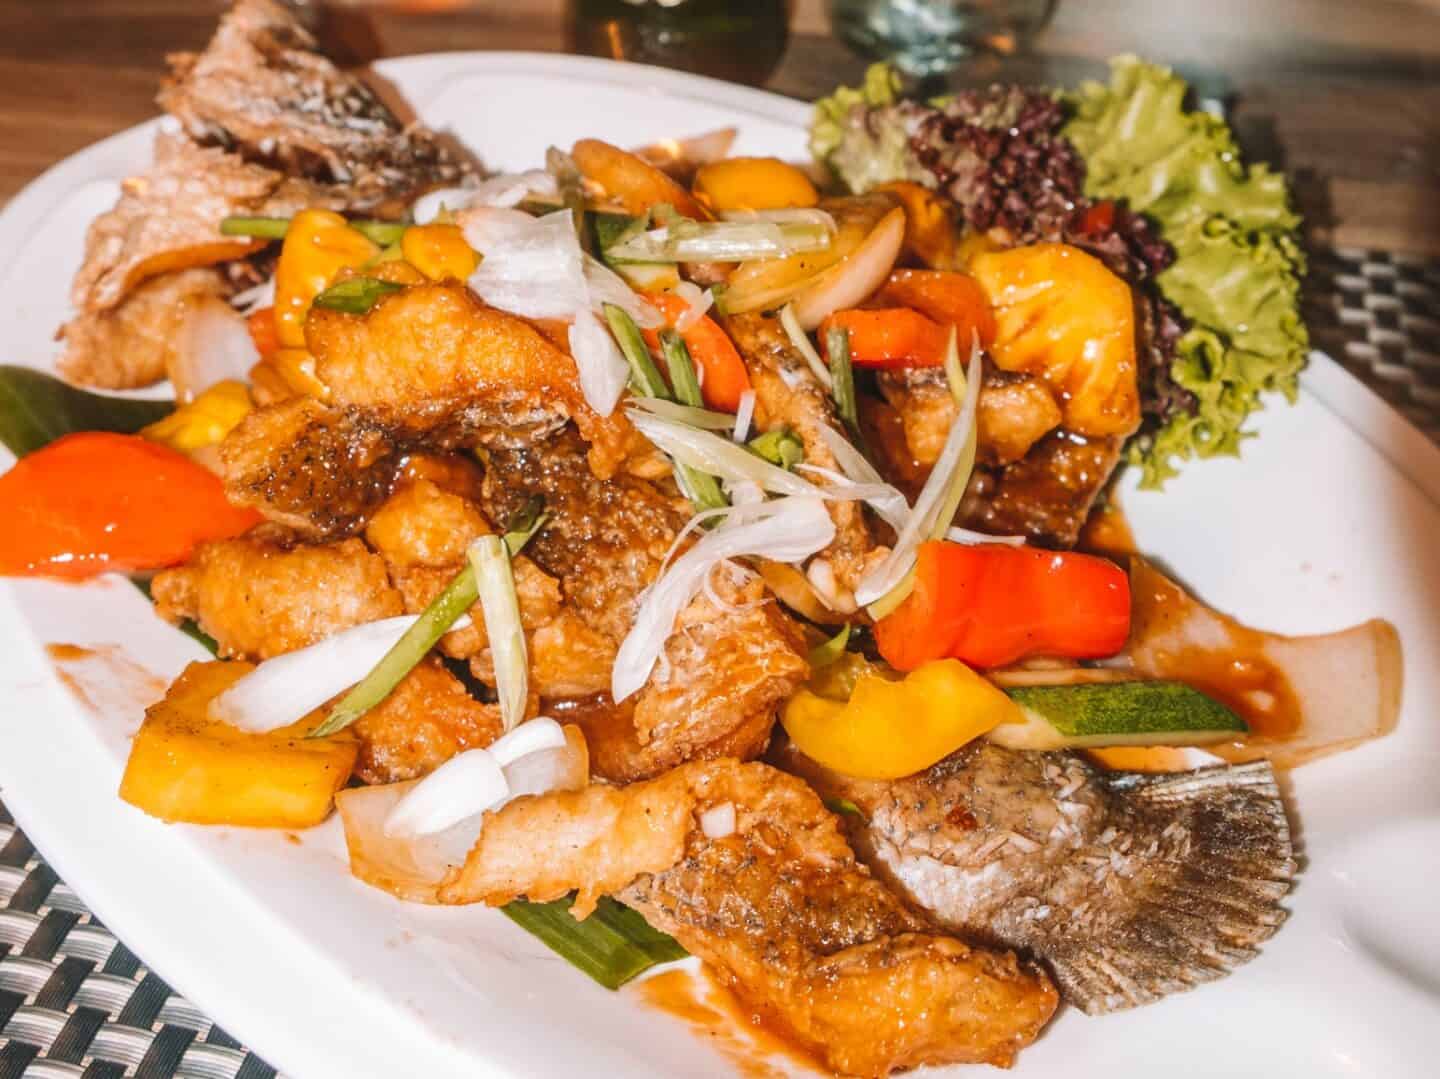 Pan Yaah Seafood Cafe is widely considered to serve some of the best Thai food Patong